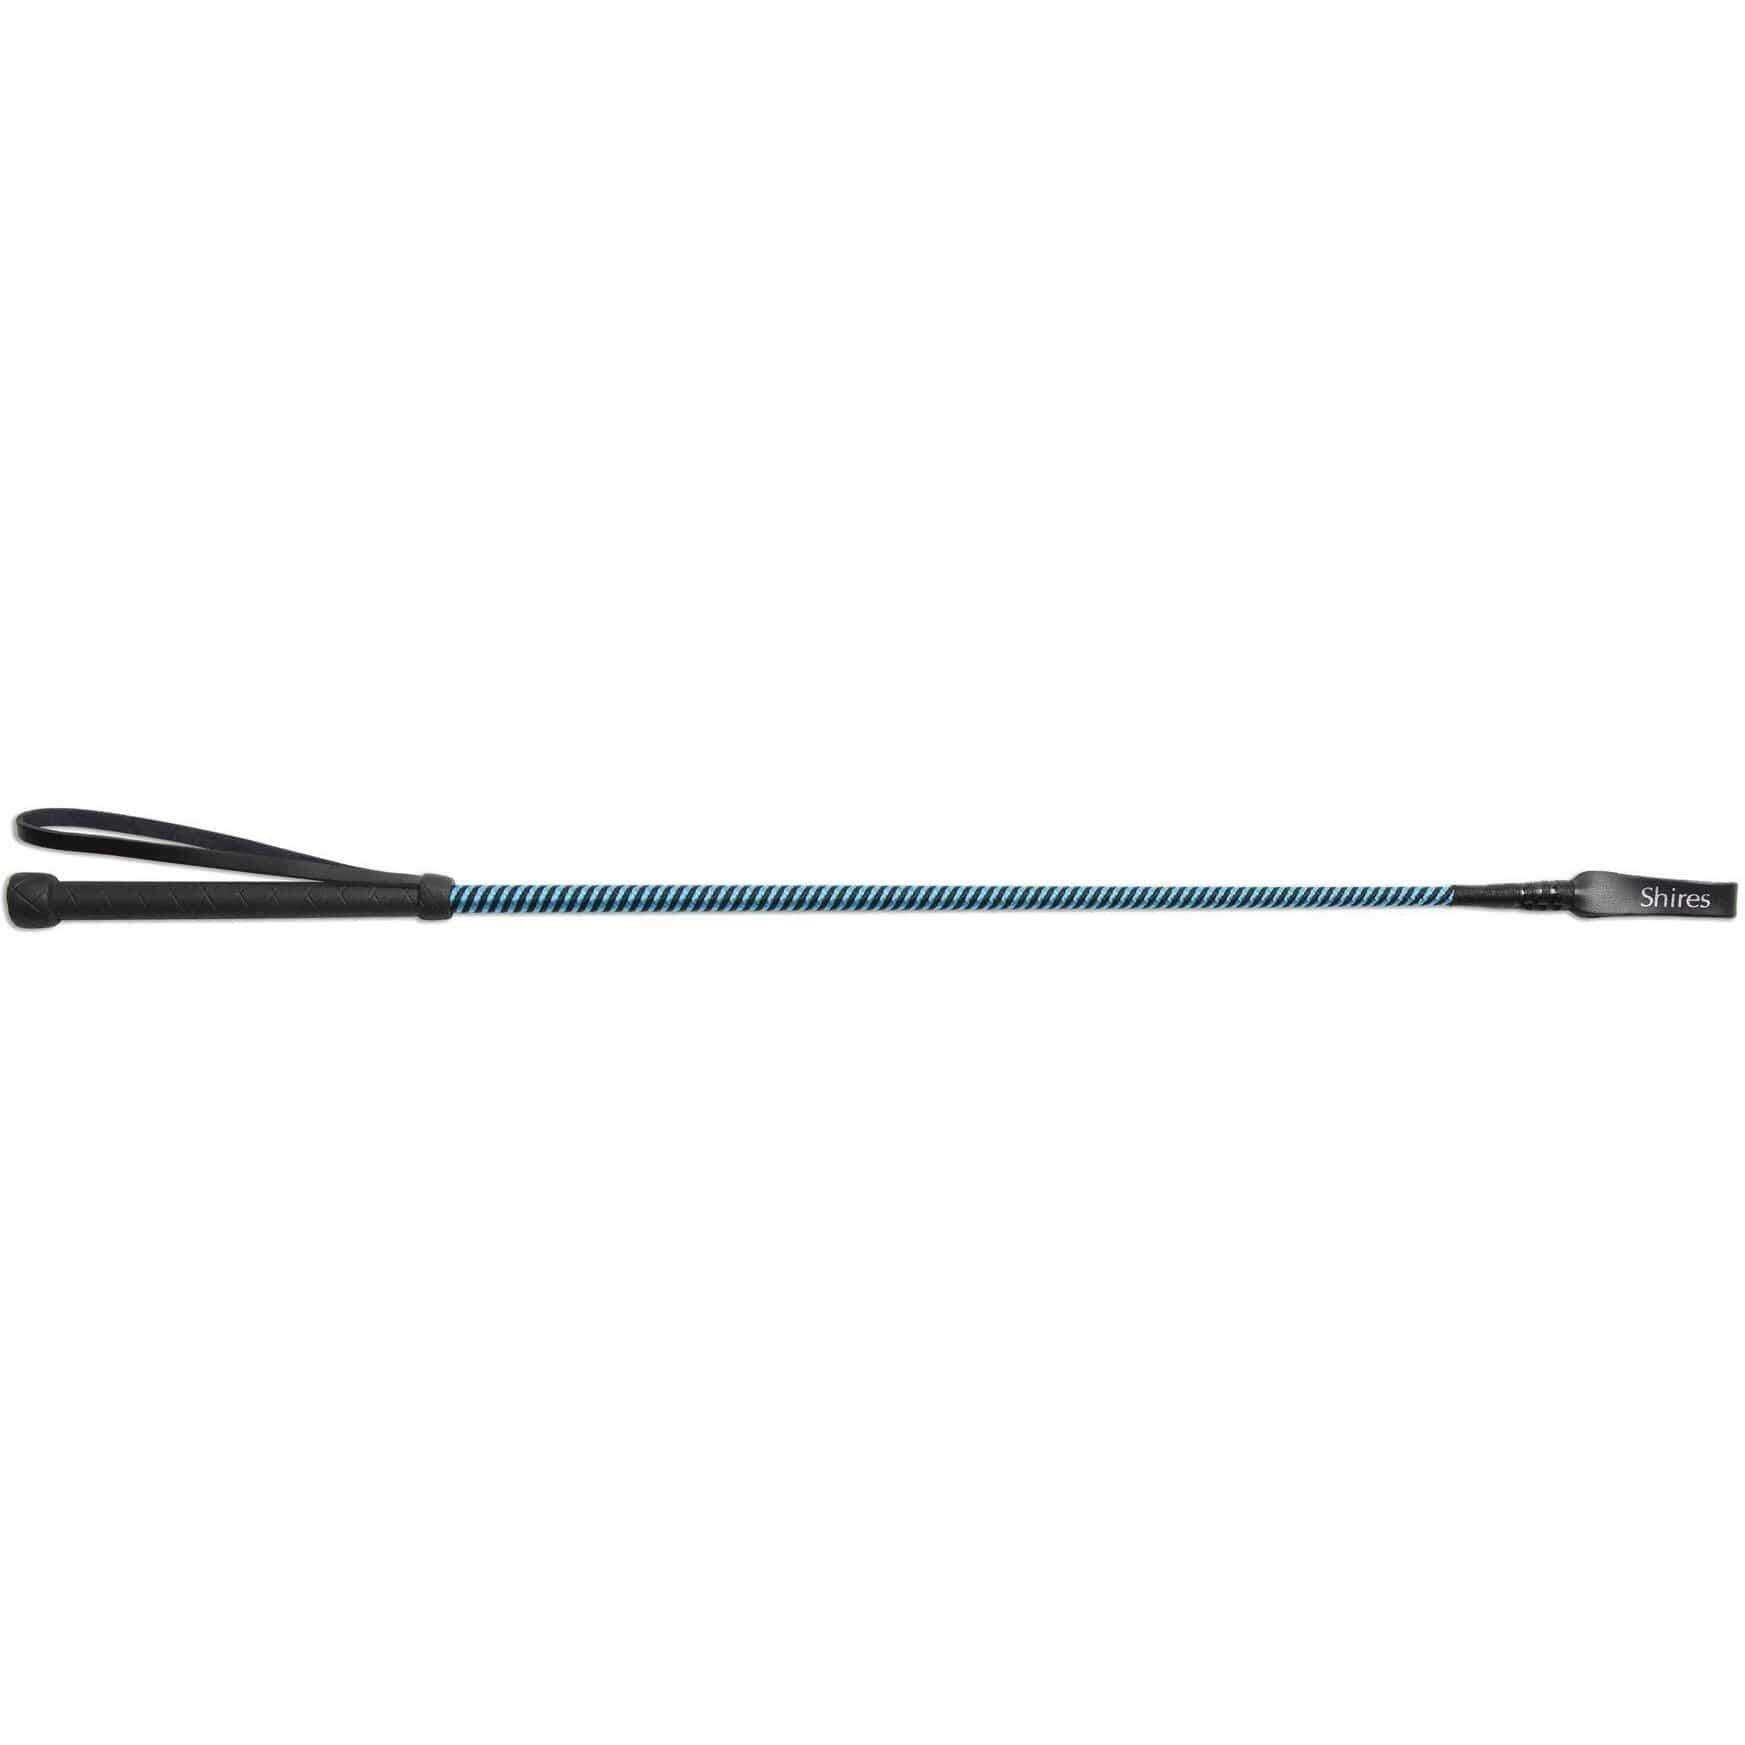 SHIRES Childrens/Kids Thread Stem Leather Horse Riding Whip (Black/Bright Blue)